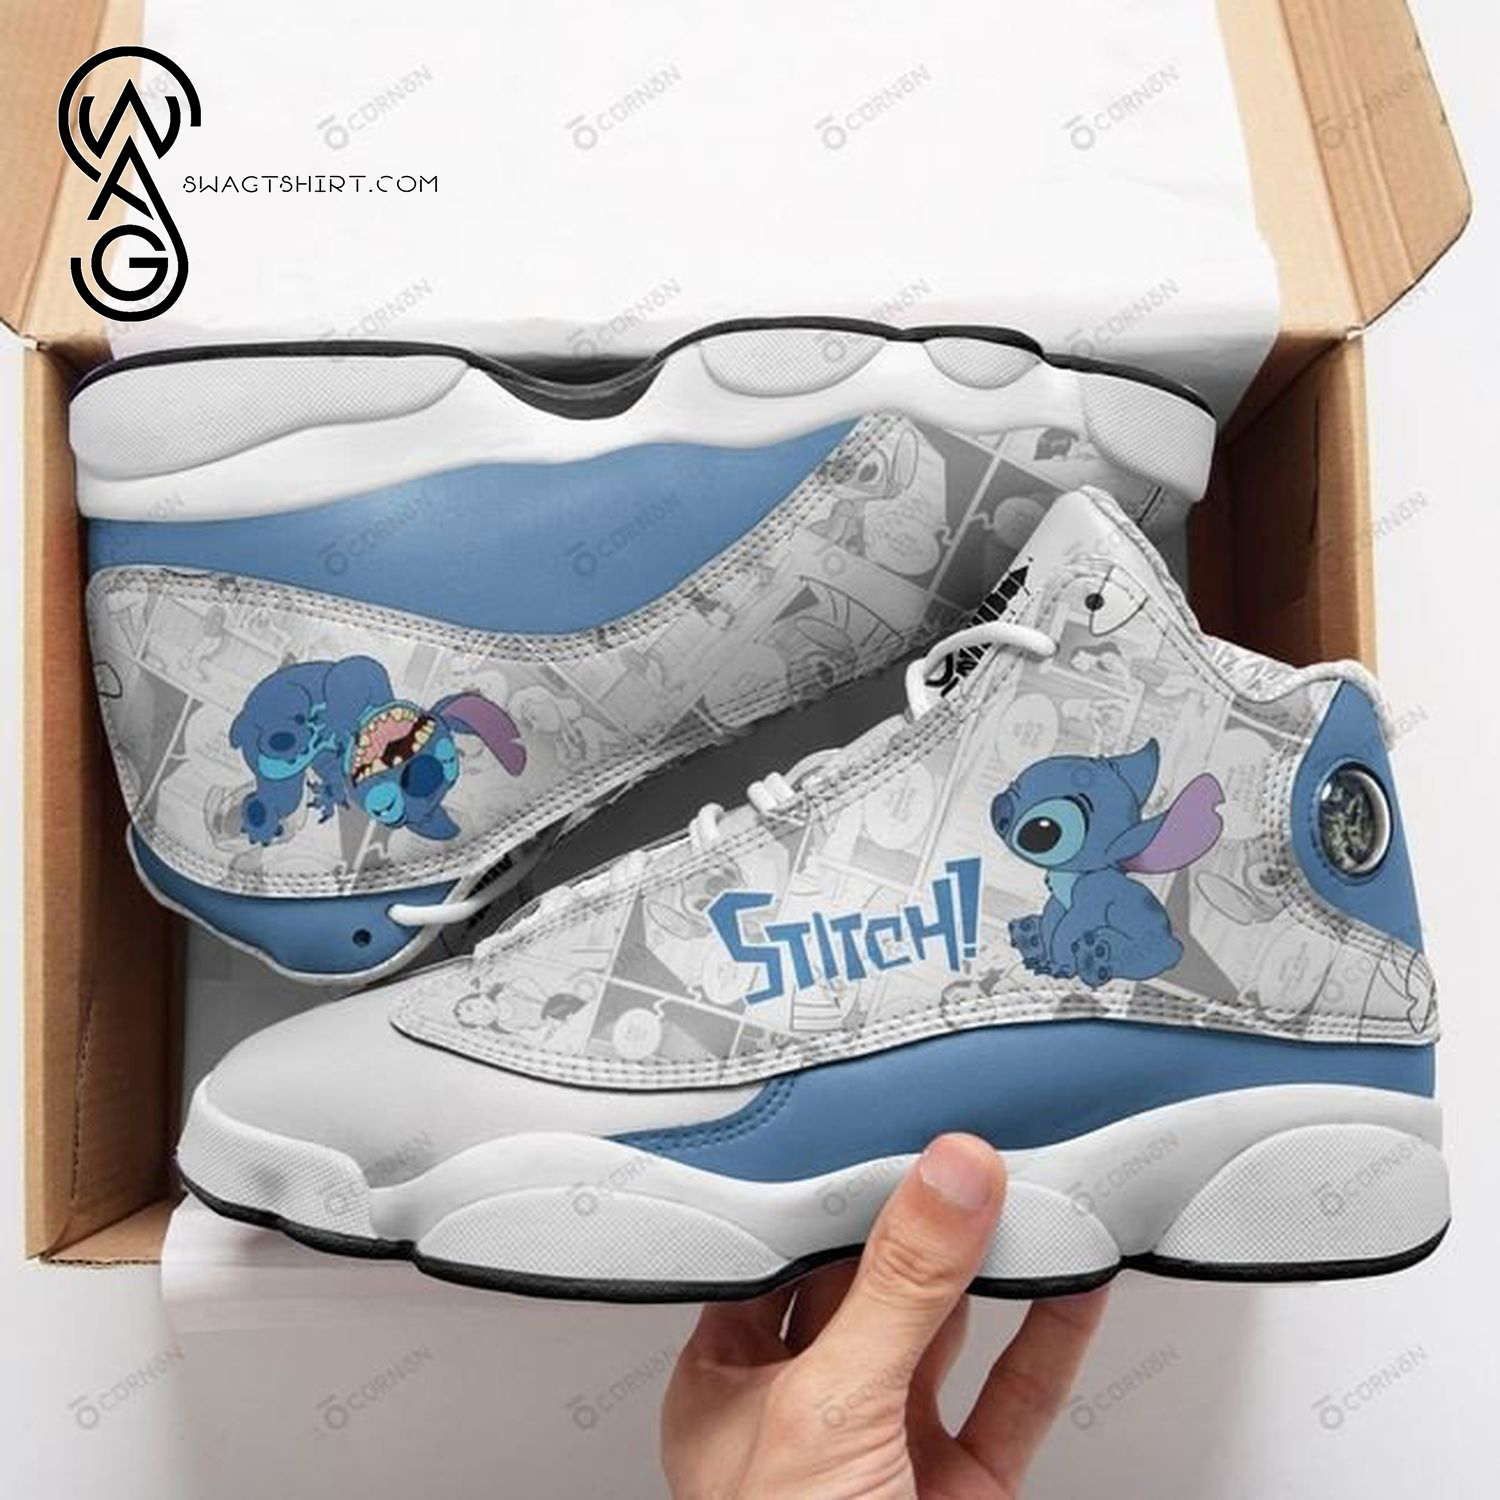 Lilo And Stitch Air Jordan 13 Shoes